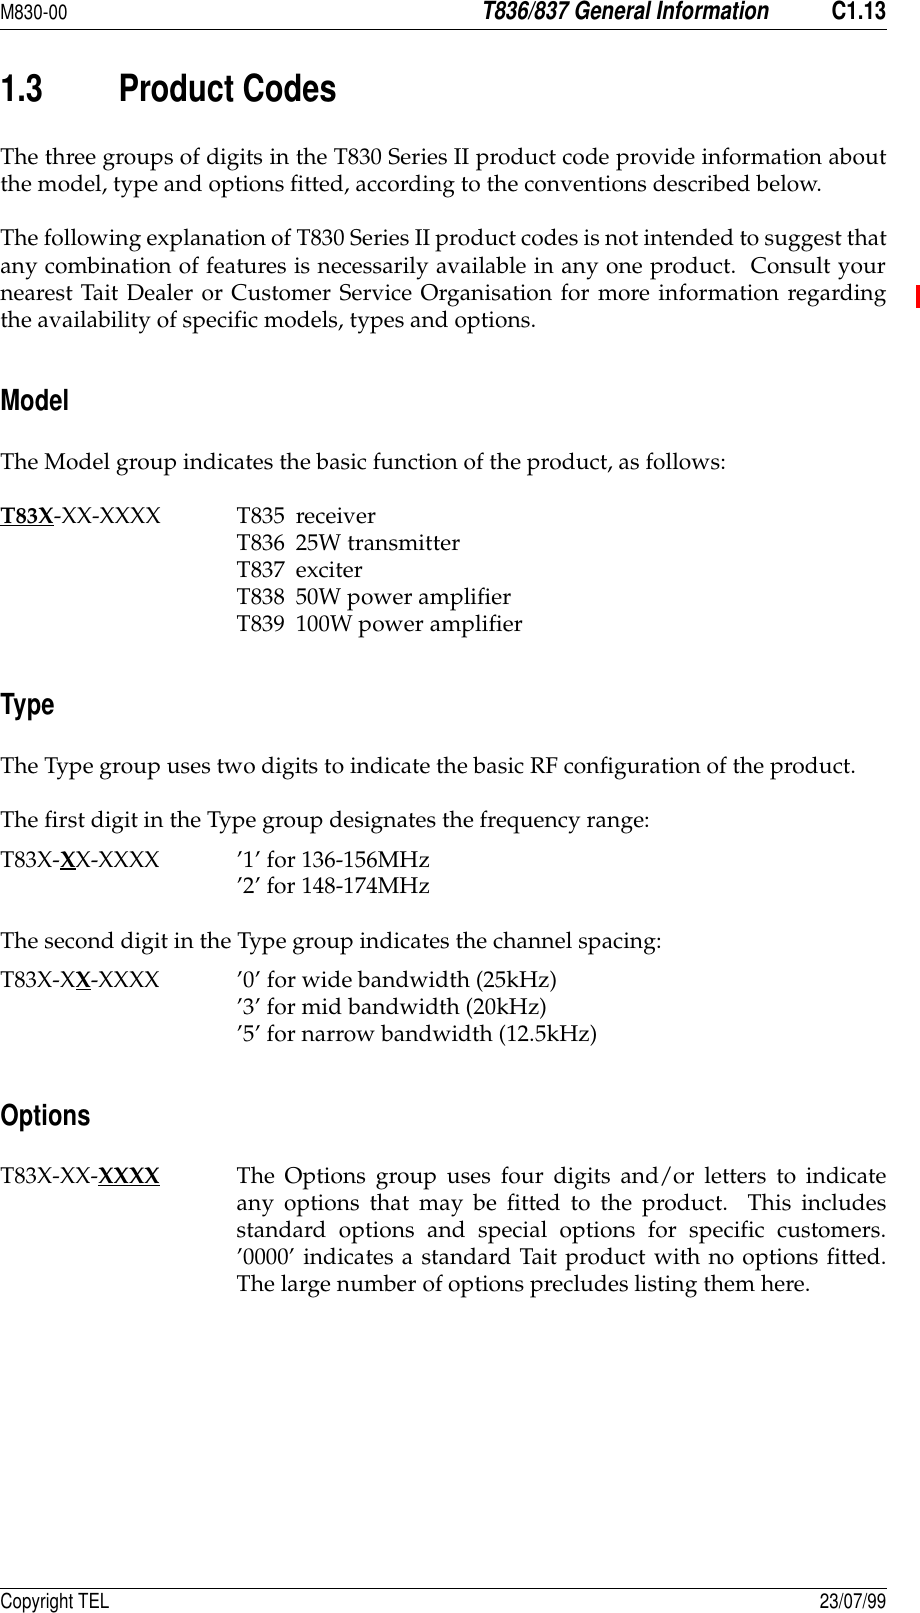 M830-00T836/837 General InformationC1.13Copyright TEL 23/07/991.3 Product CodesThe three groups of digits in the T830 Series II product code provide information aboutthe model, type and options fitted, according to the conventions described below.The following explanation of T830 Series II product codes is not intended to suggest thatany combination of features is necessarily available in any one product.  Consult yournearest Tait Dealer or Customer Service Organisation for more information regardingthe availability of specific models, types and options.ModelThe Model group indicates the basic function of the product, as follows:T83X-XX-XXXX T835 receiverT836 25W transmitterT837 exciterT838 50W power amplifierT839 100W power amplifierTypeThe Type group uses two digits to indicate the basic RF configuration of the product.The first digit in the Type group designates the frequency range:T83X-XX-XXXX ’1’ for 136-156MHz’2’ for 148-174MHzThe second digit in the Type group indicates the channel spacing:T83X-XX-XXXX ’0’ for wide bandwidth (25kHz)’3’ for mid bandwidth (20kHz)’5’ for narrow bandwidth (12.5kHz)OptionsT83X-XX-XXXX The Options group uses four digits and/or letters to indicateany options that may be fitted to the product.  This includesstandard options and special options for specific customers.’0000’ indicates a standard Tait product with no options fitted.The large number of options precludes listing them here.